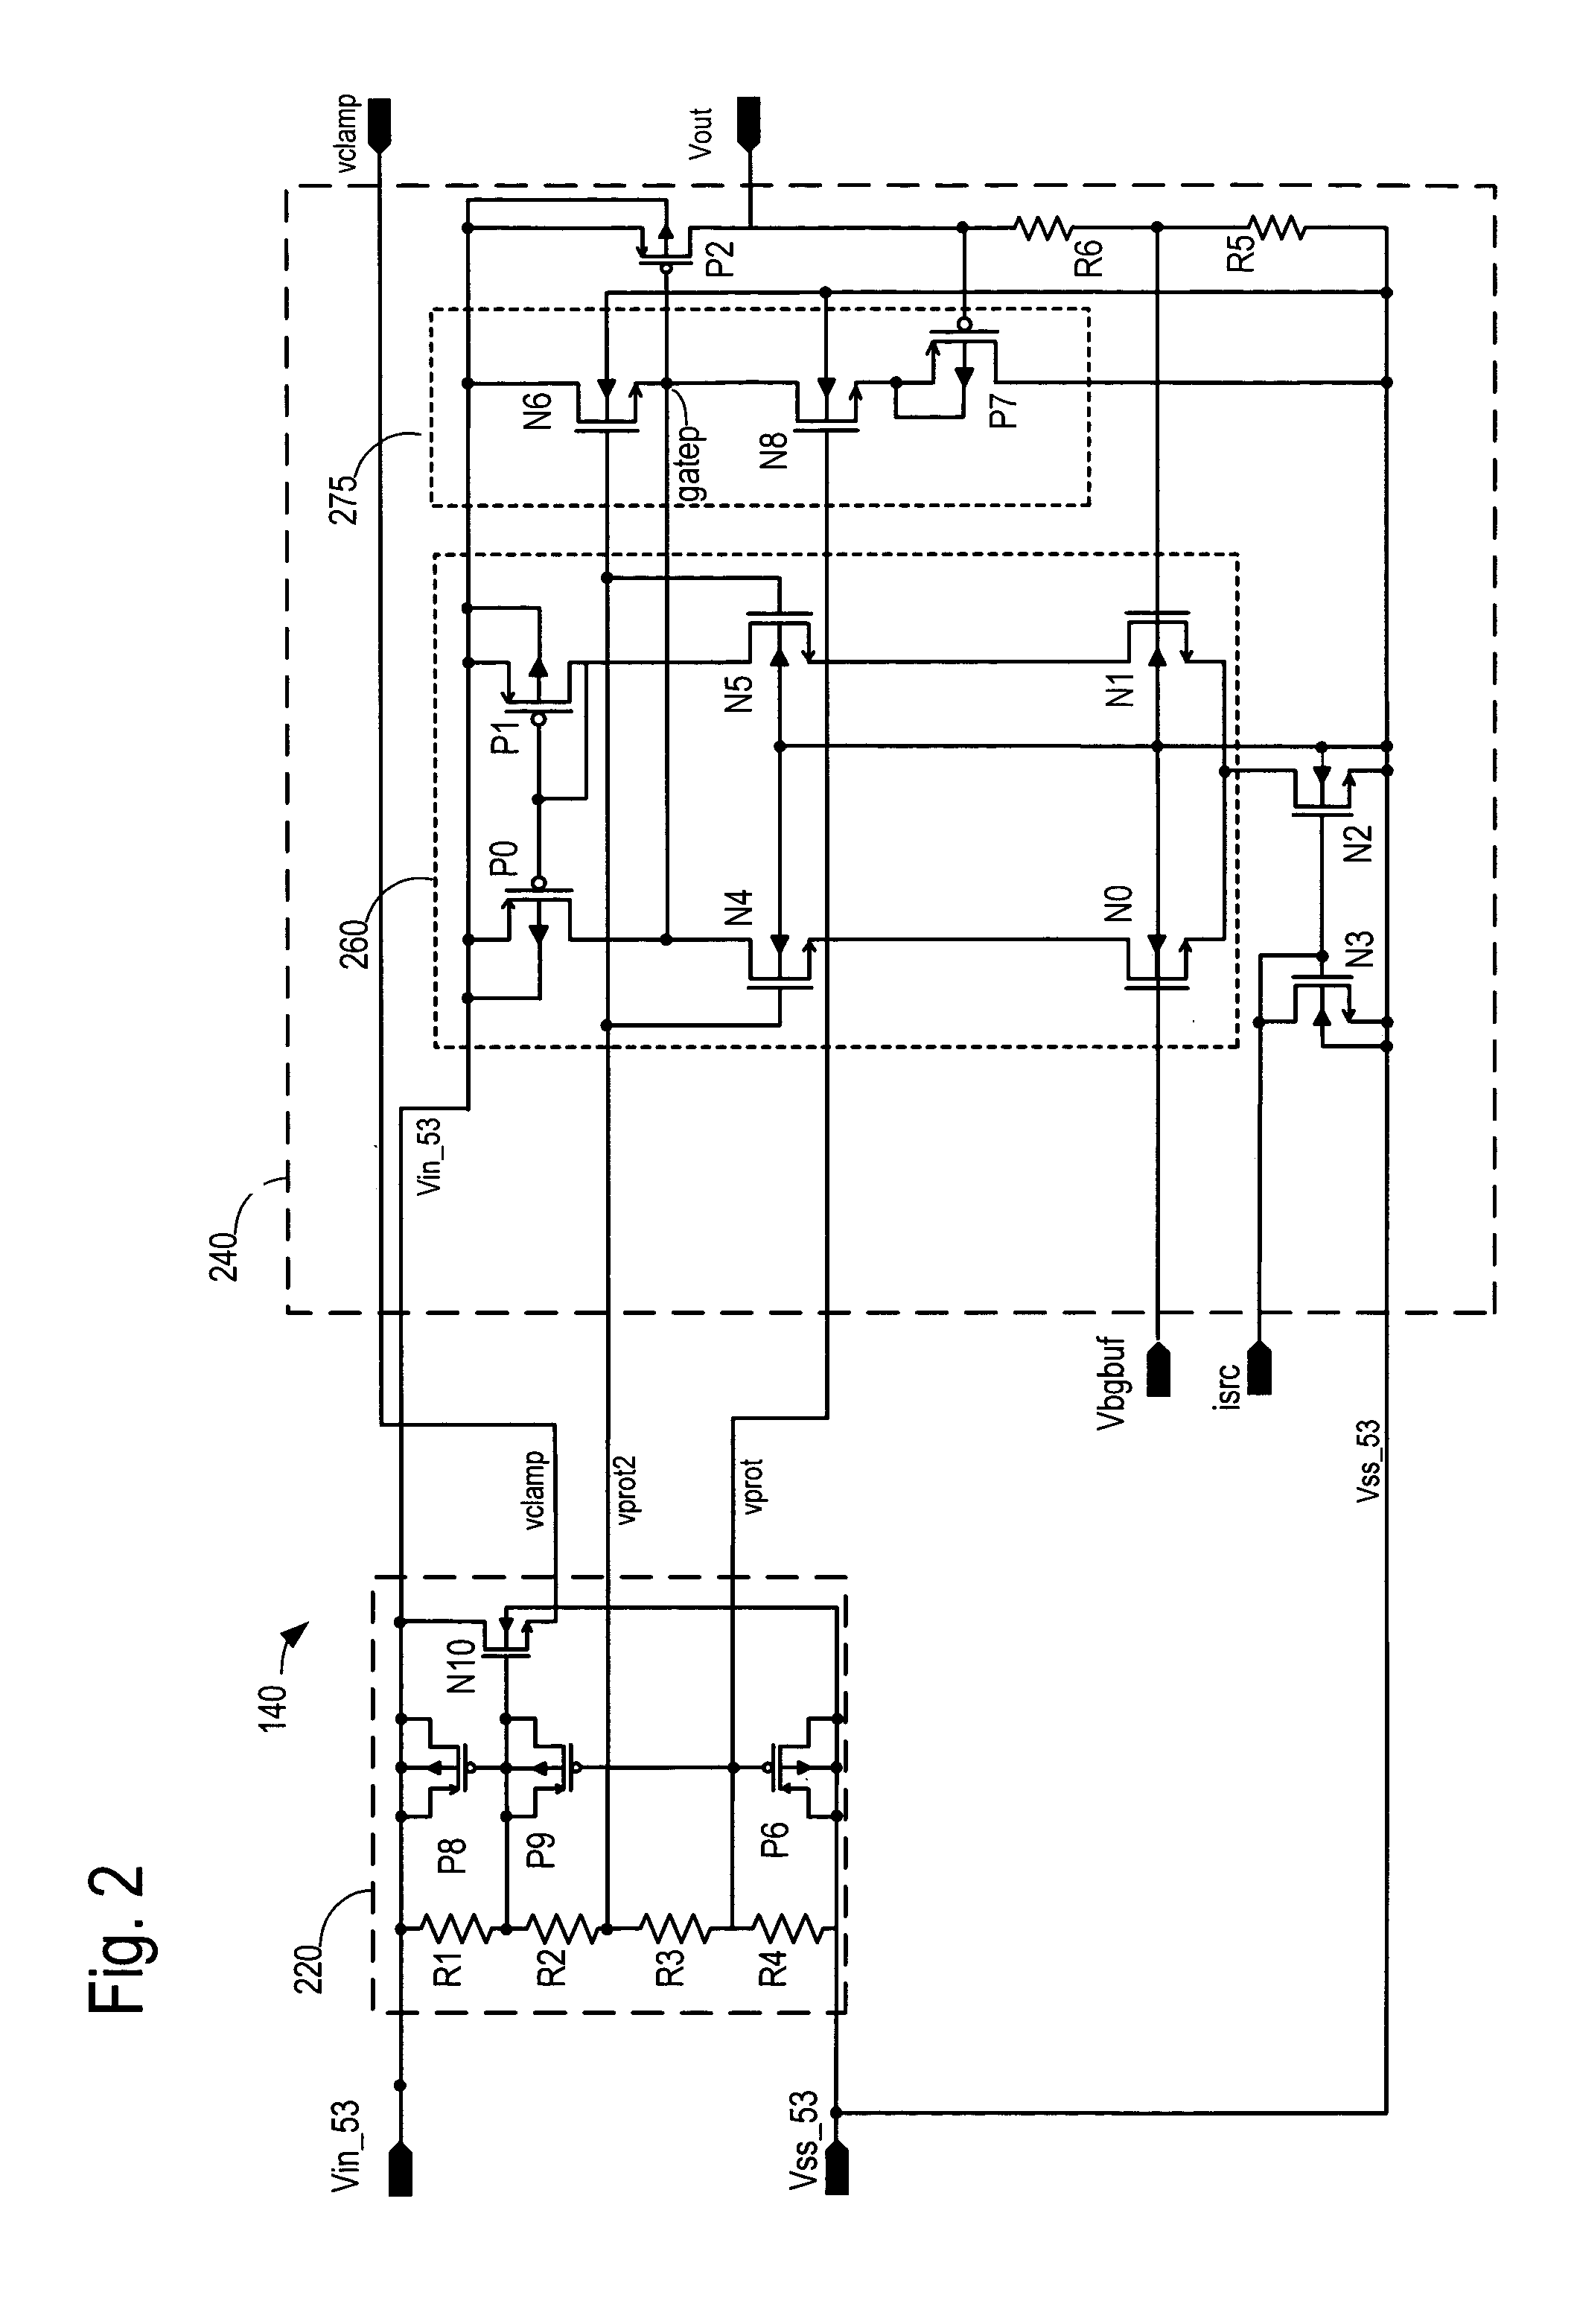 Voltage regulator using protected low voltage devices